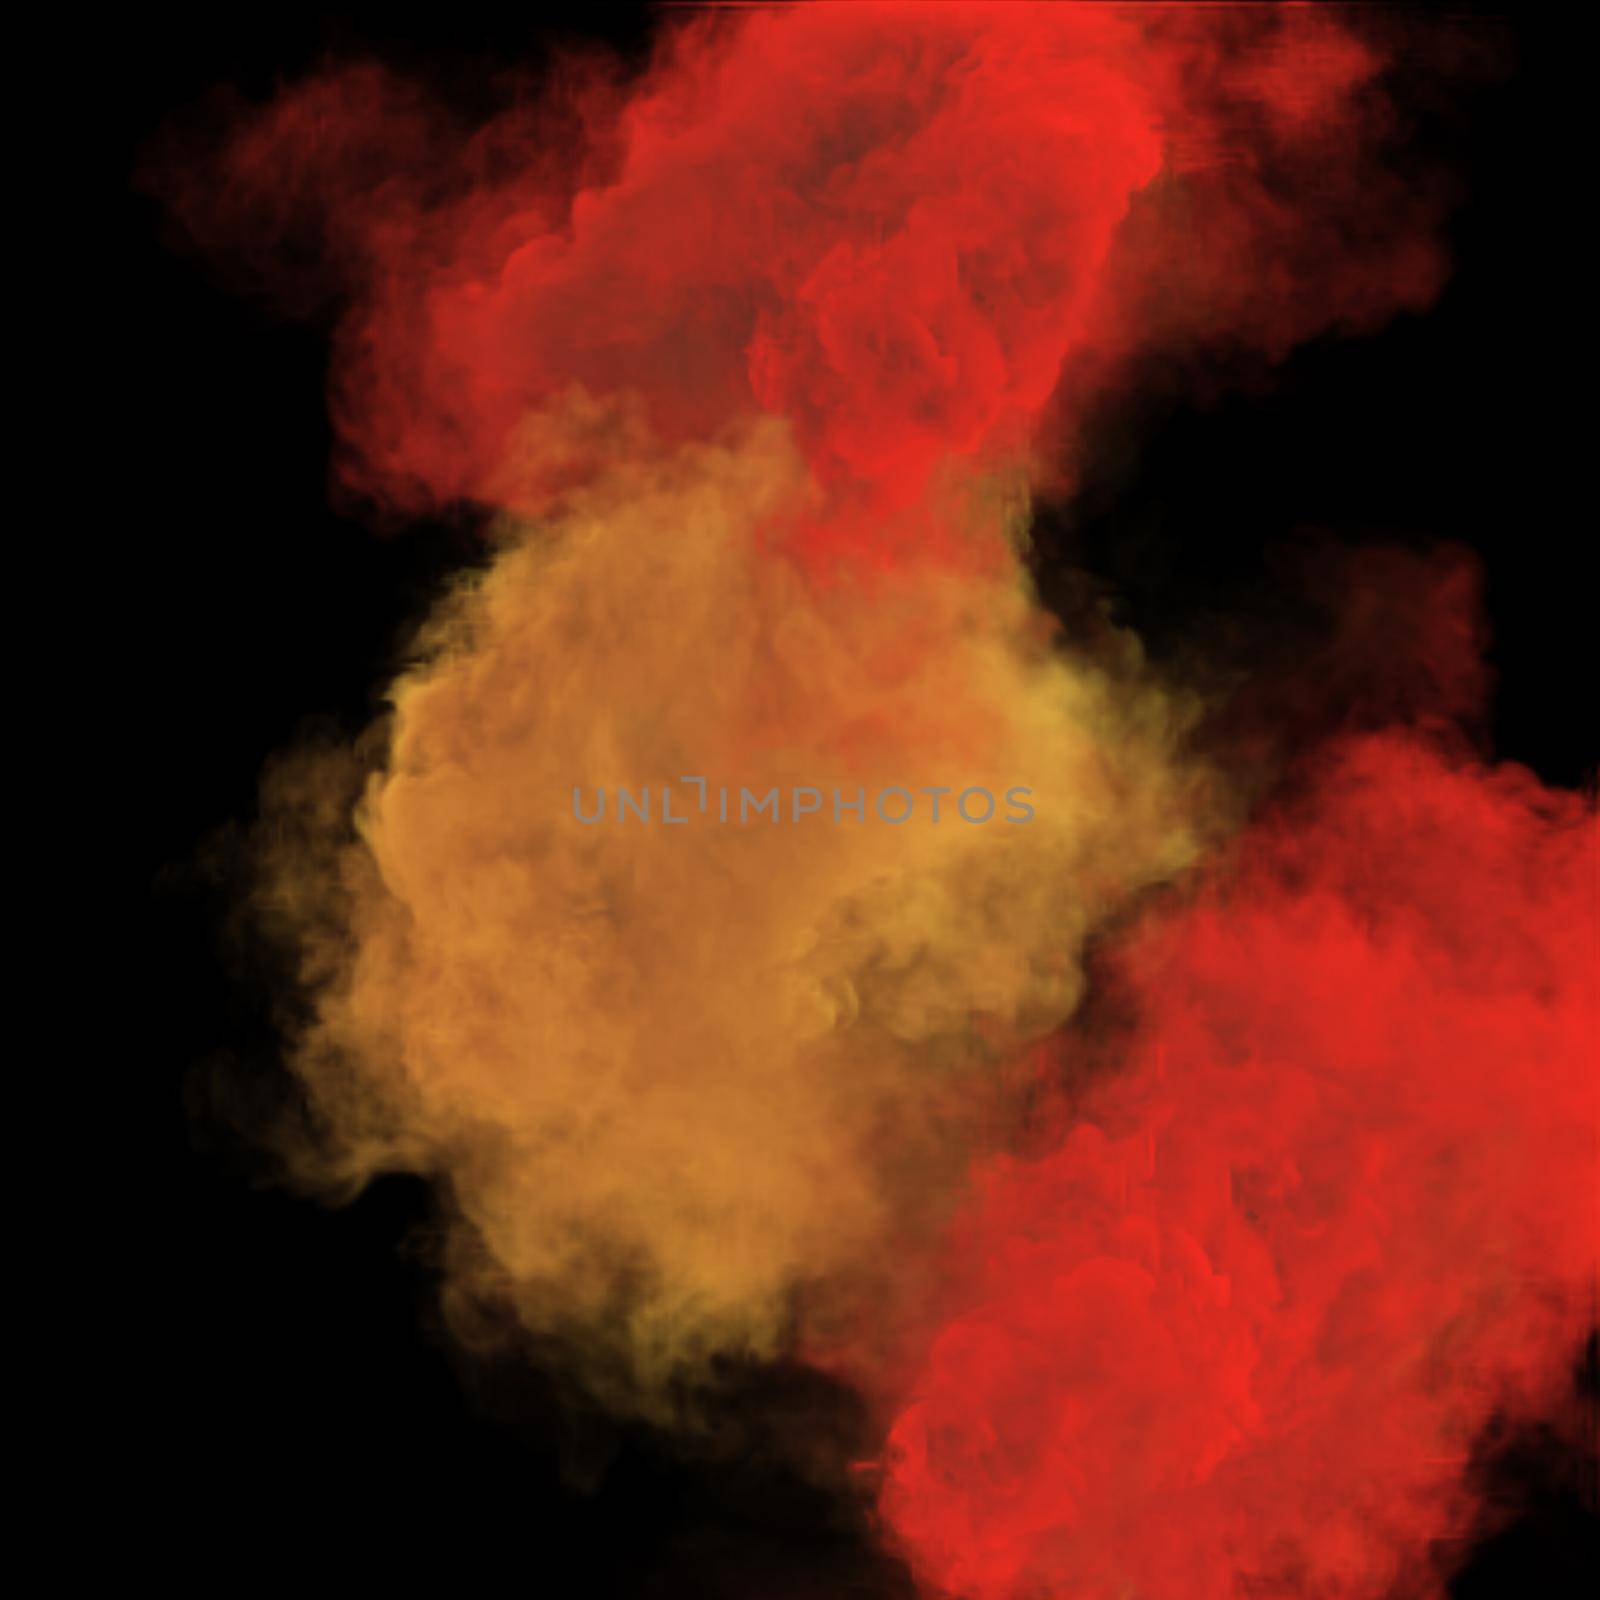 Red and yellow puffs of magic fog and fantasy smoke texture. Duo colors 3D render abstract background for fest and fan party decoration